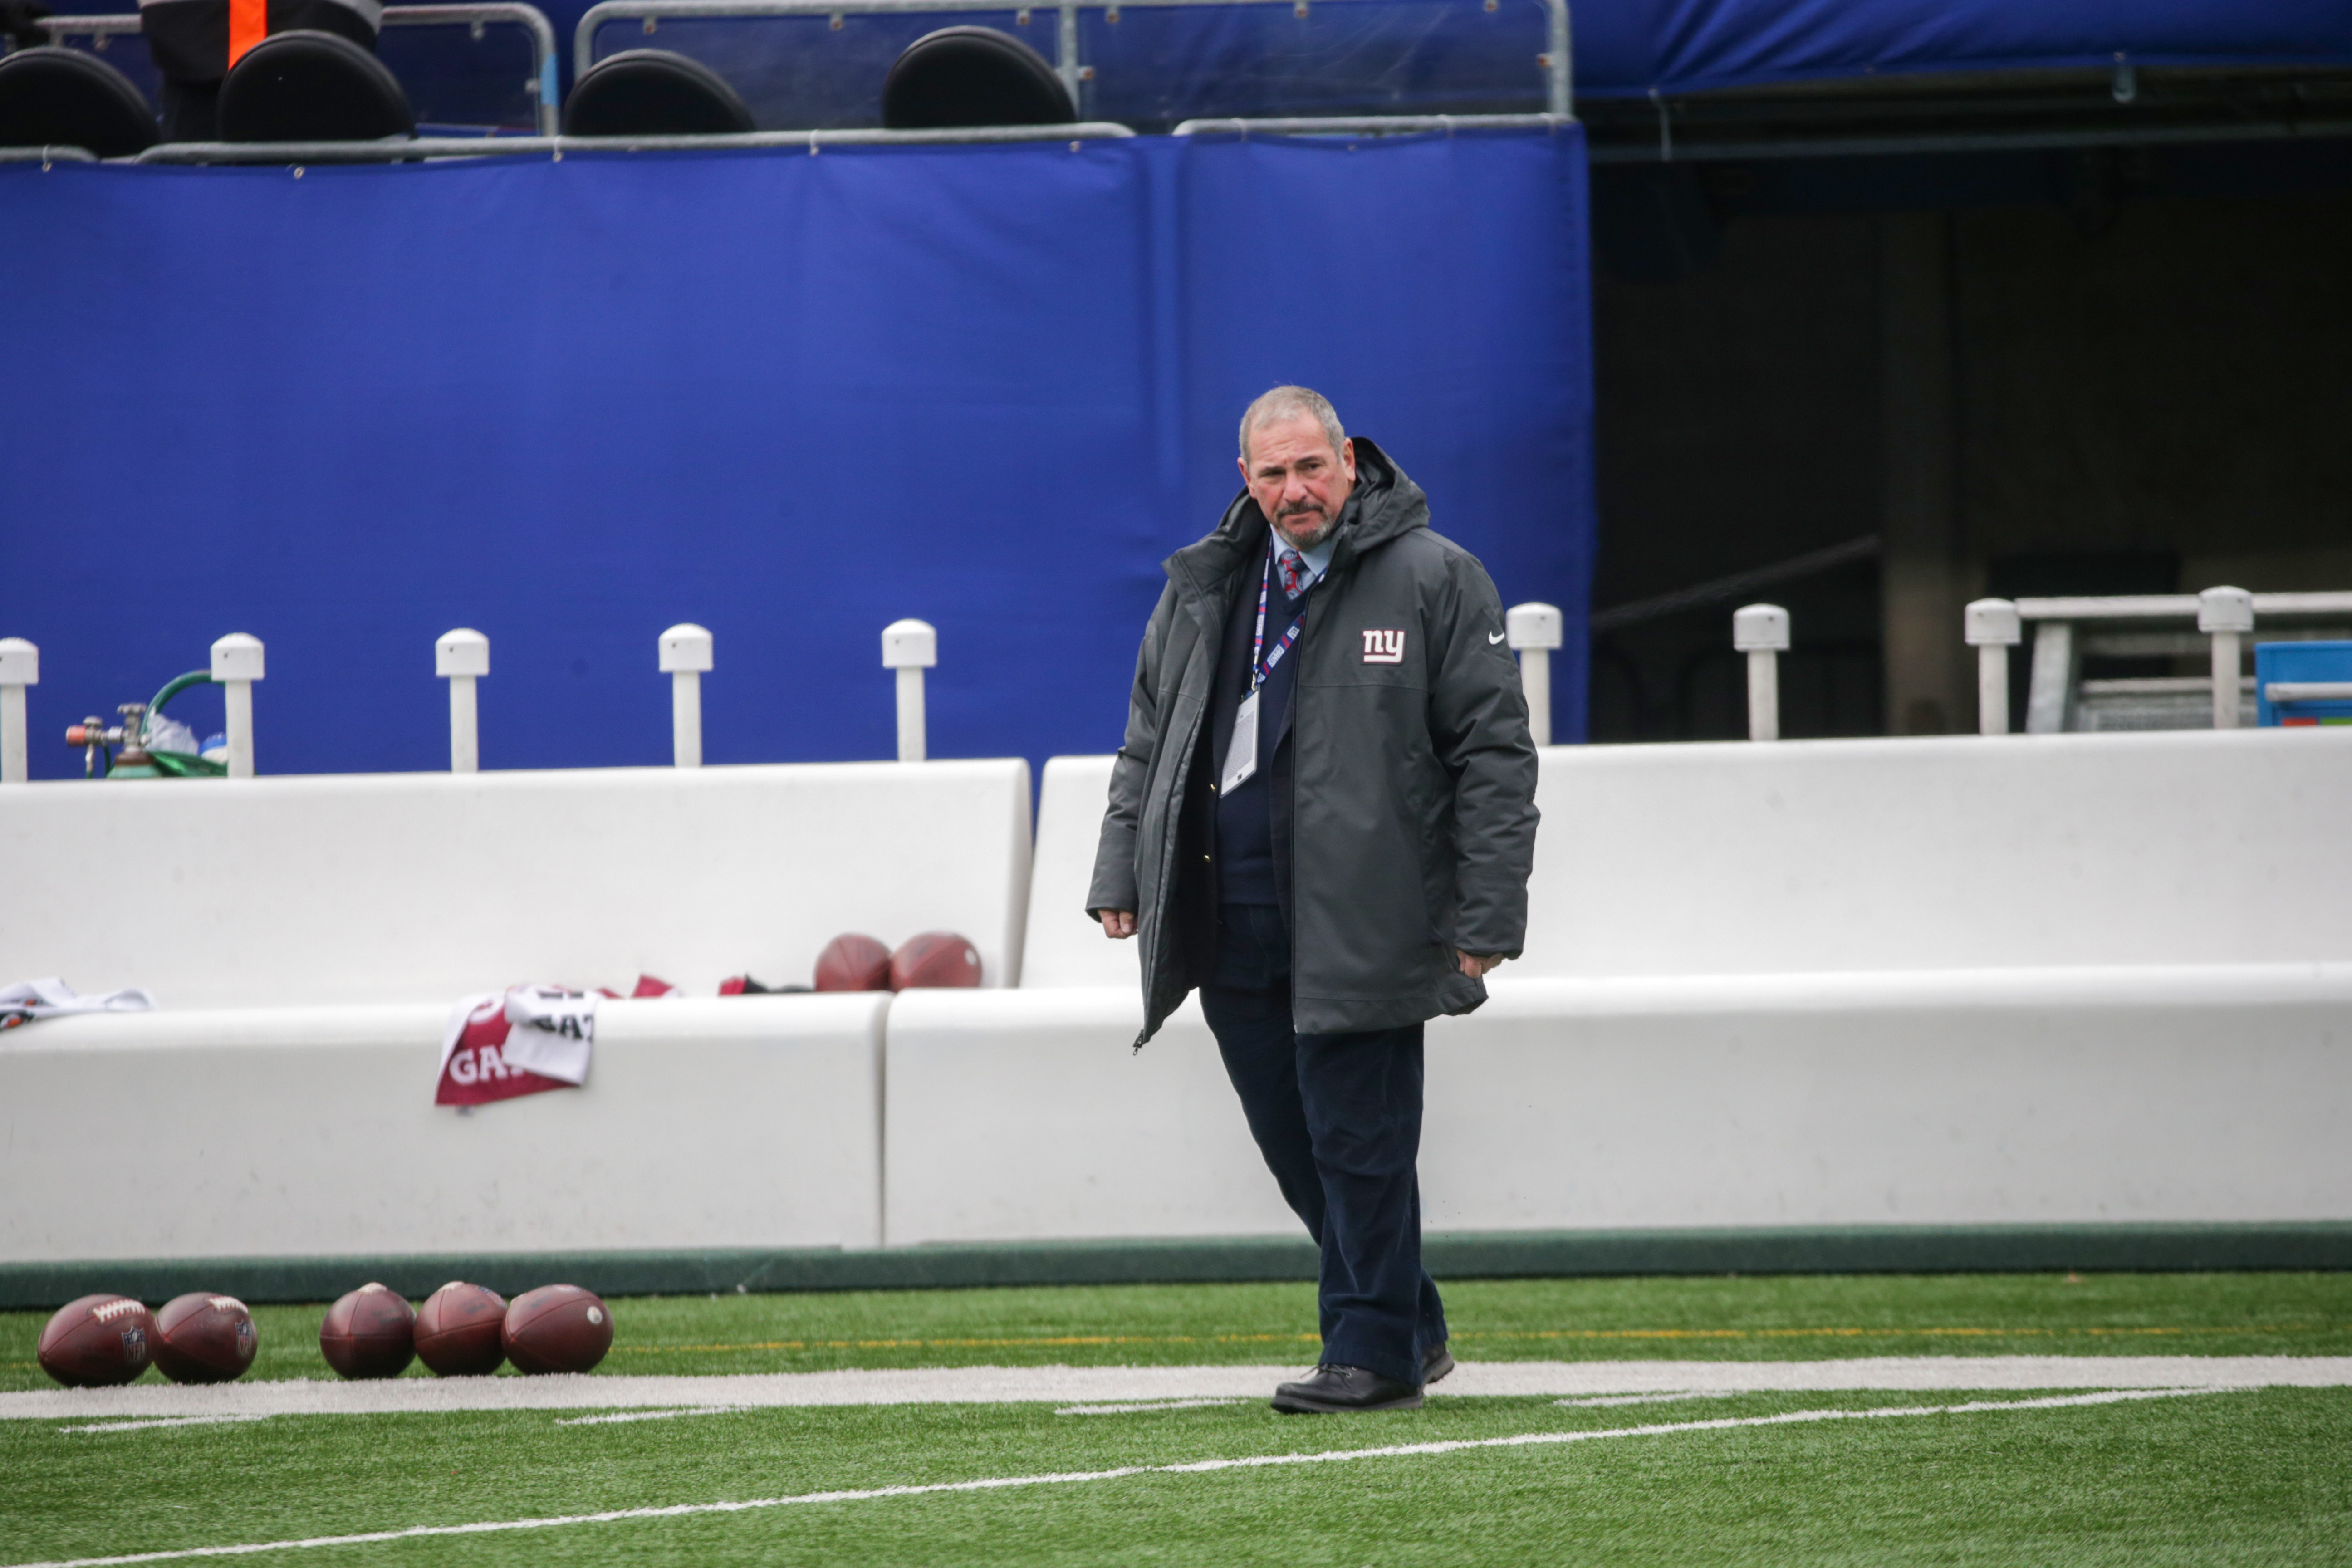 New York Giants Dave Gettleman during pregame warmups as the Giants prepare to host the Washington Football Team on Sunday, Jan. 9, 2022 in East Rutherford, N.J.